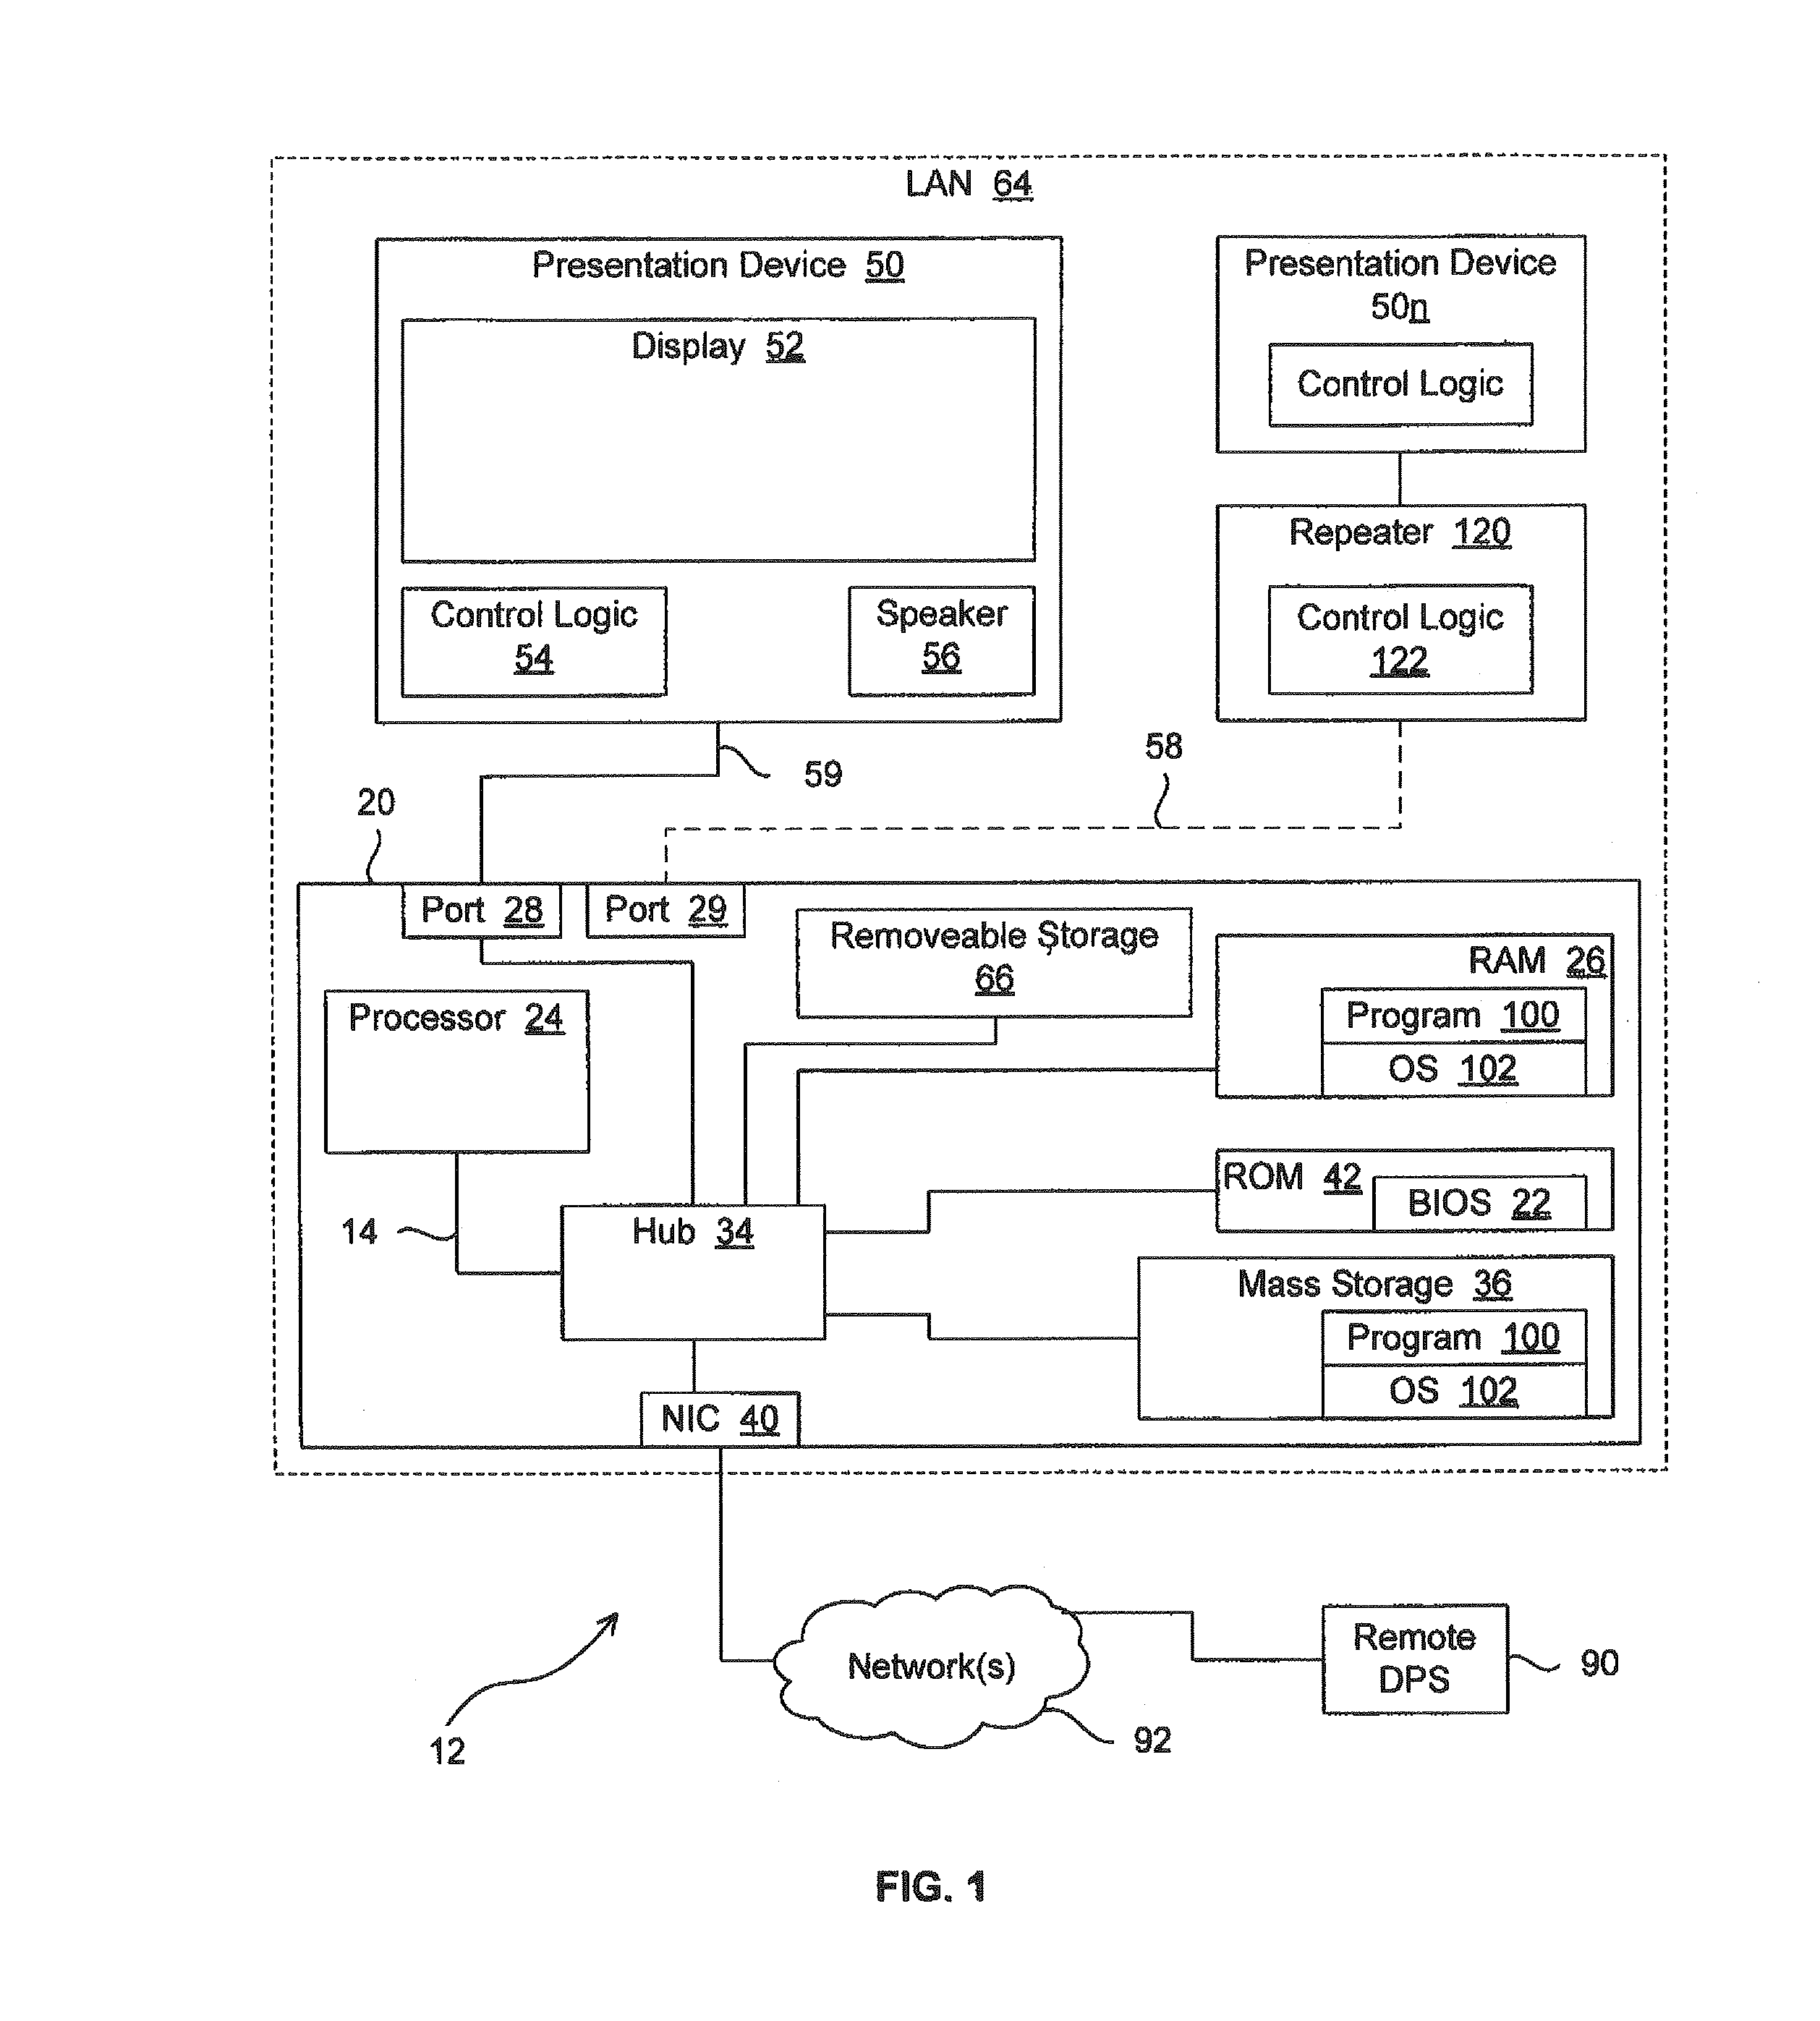 Apparatuses, systems, and methods for renewability with digital content protection systems